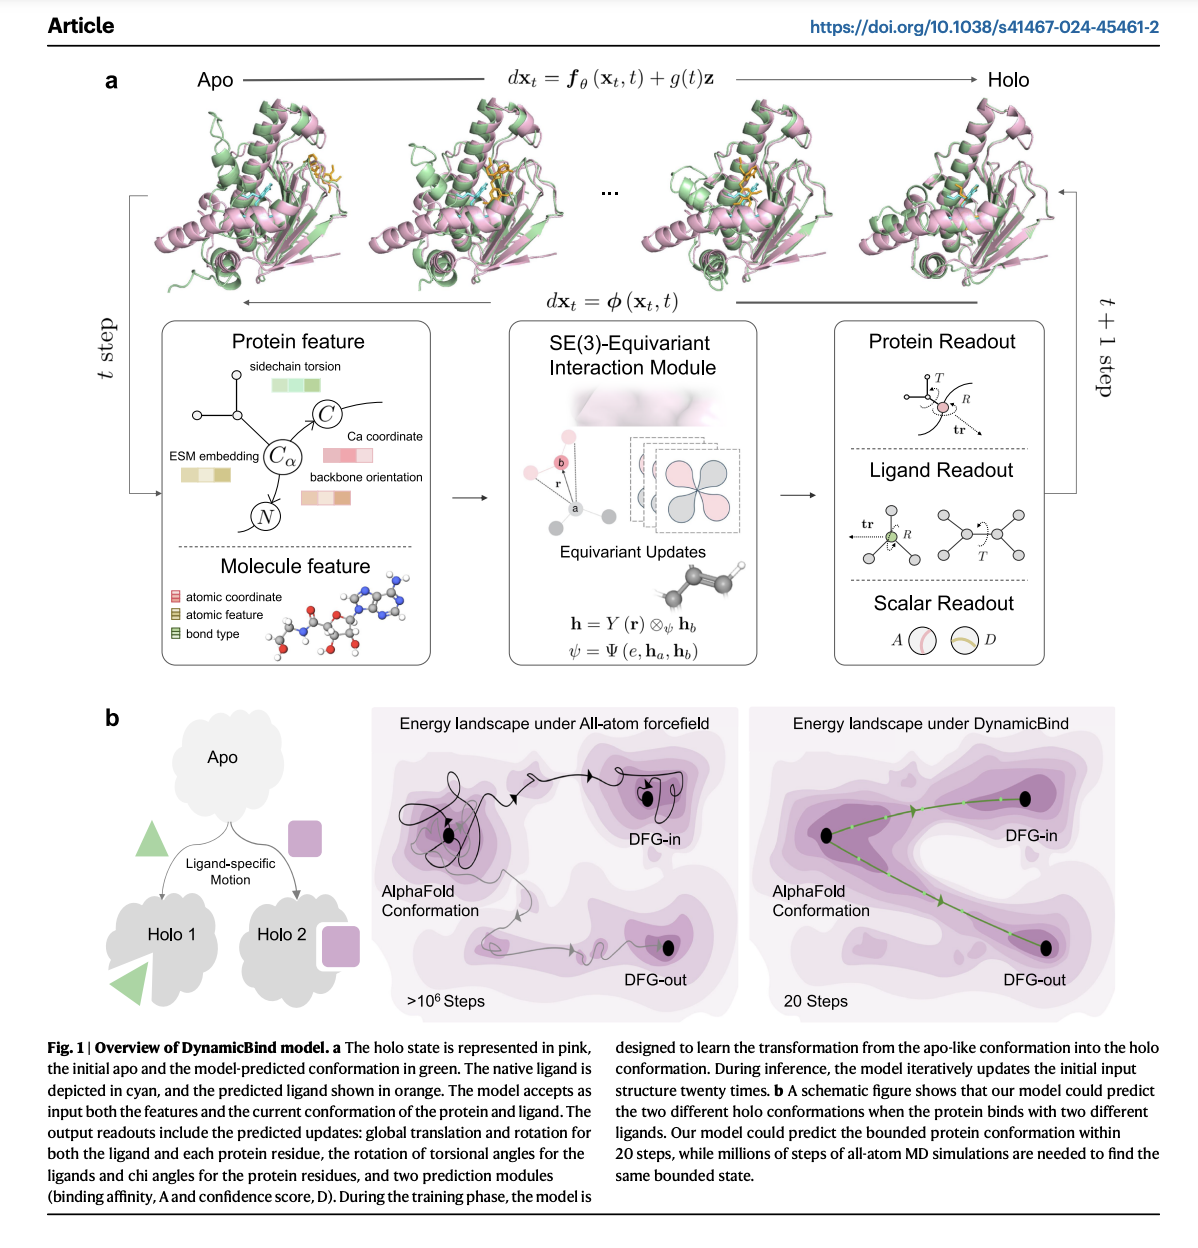  DynamicBind: A Deep Learning Approach for Dynamic Protein-Ligand Docking and Drug Discovery